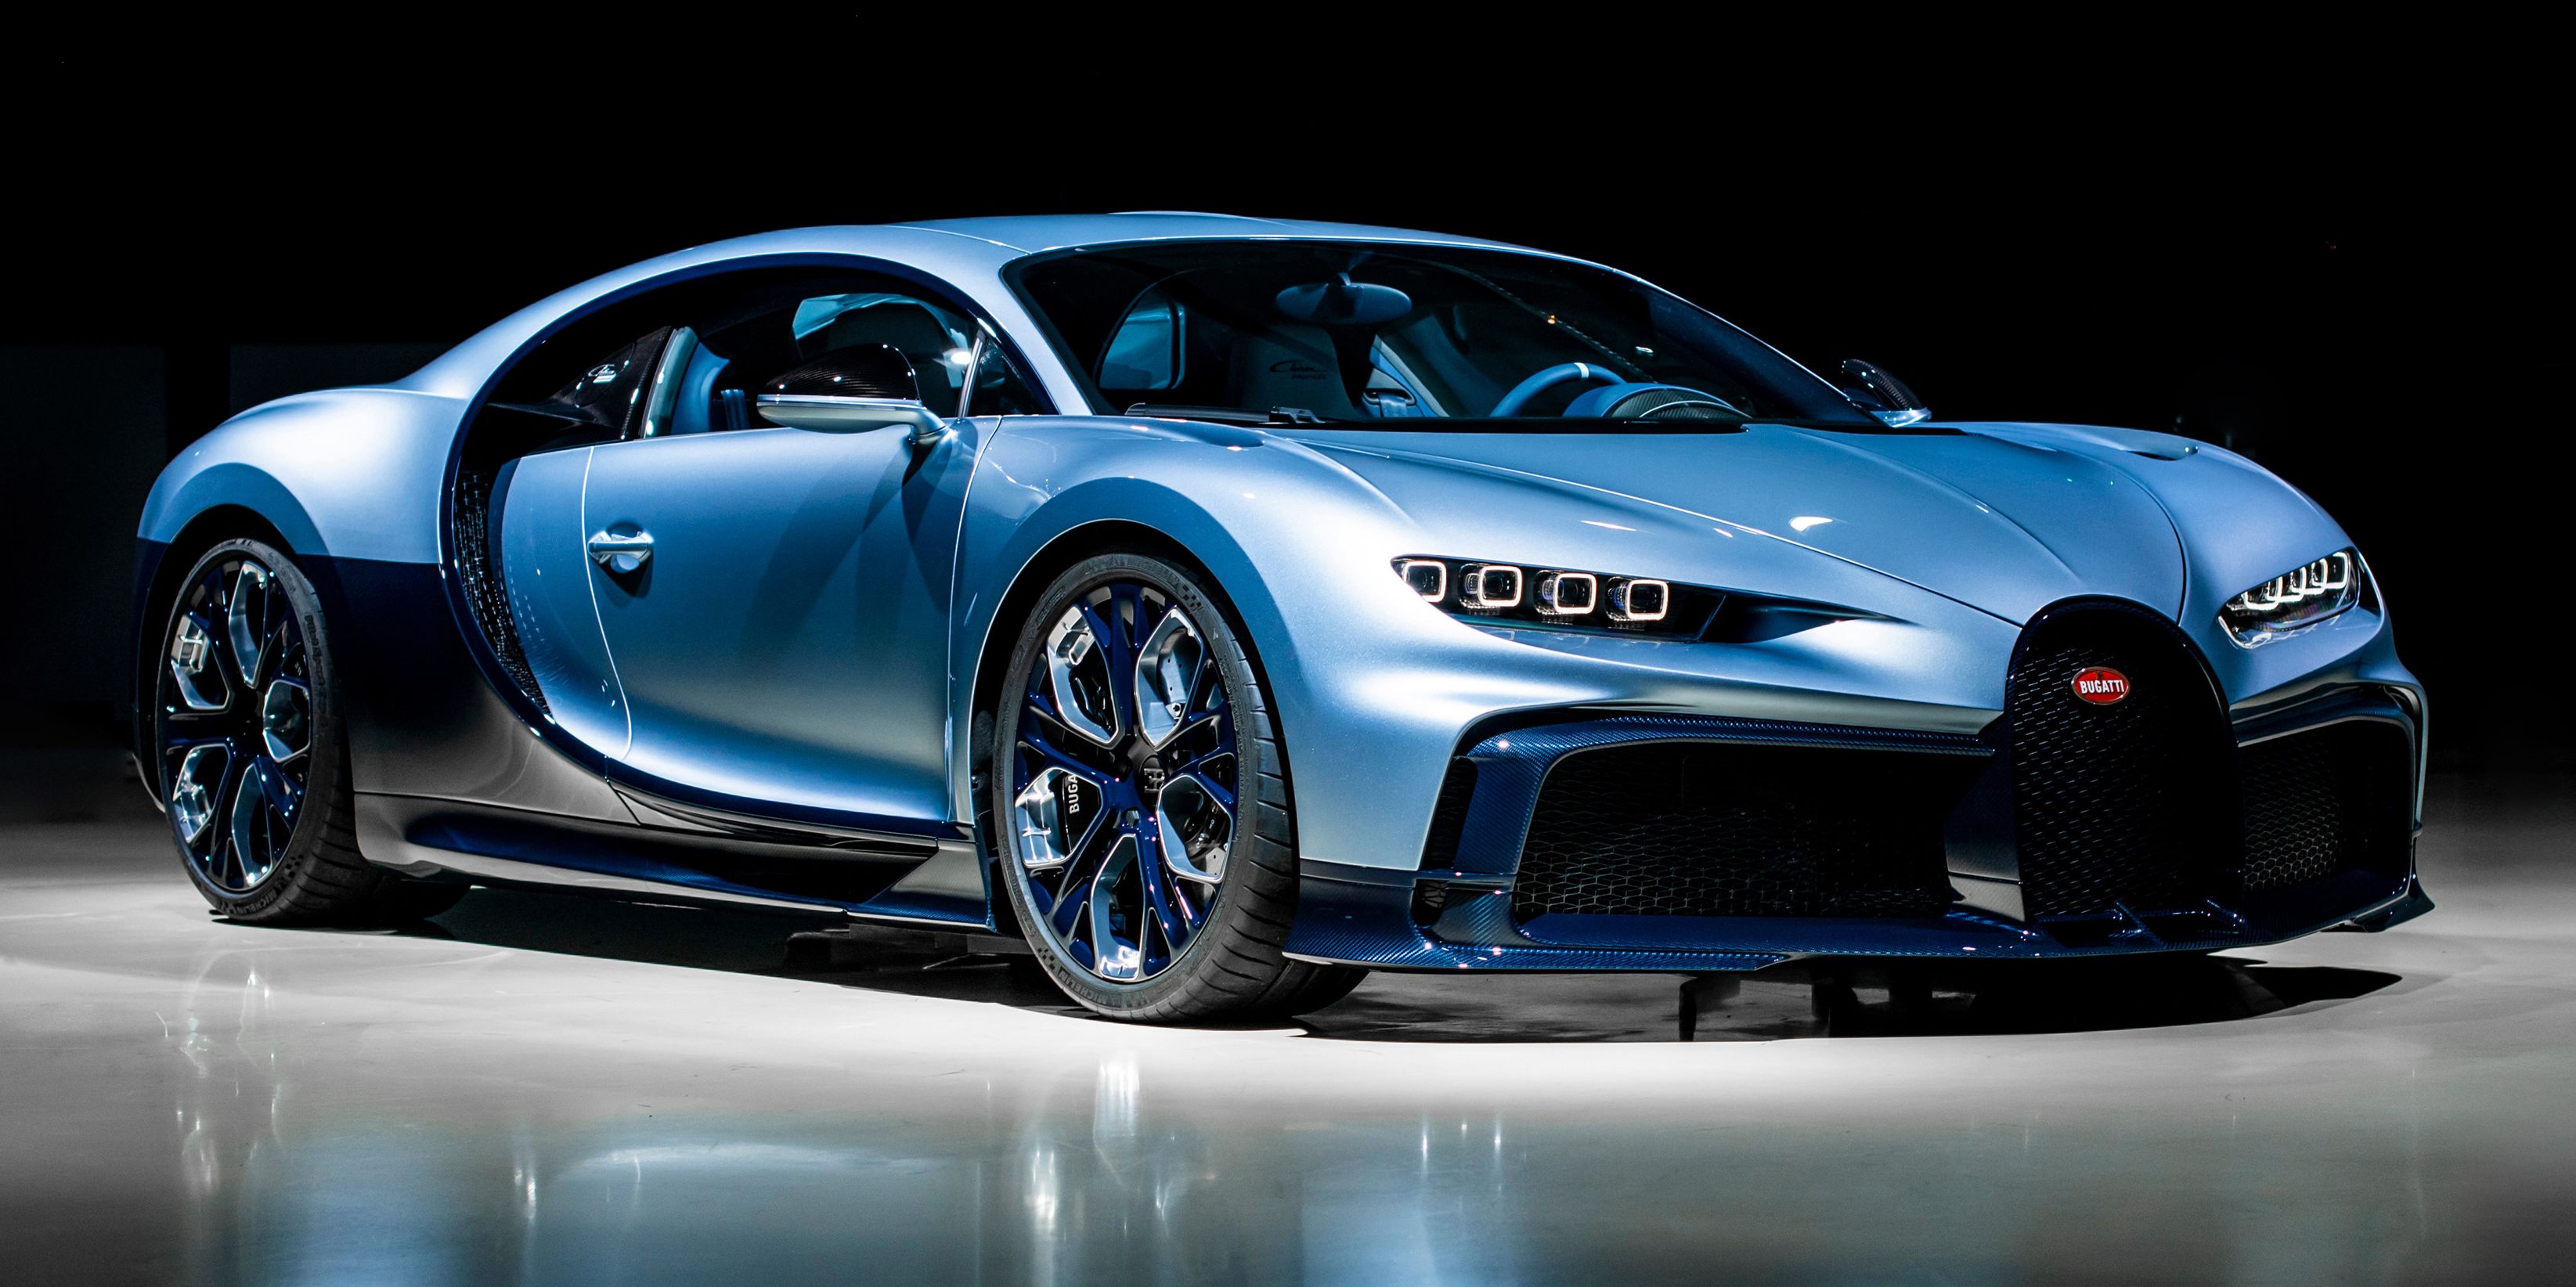 Bugatti Is Auctioning Off a One-Off Chiron Trim That Never Made it to Production